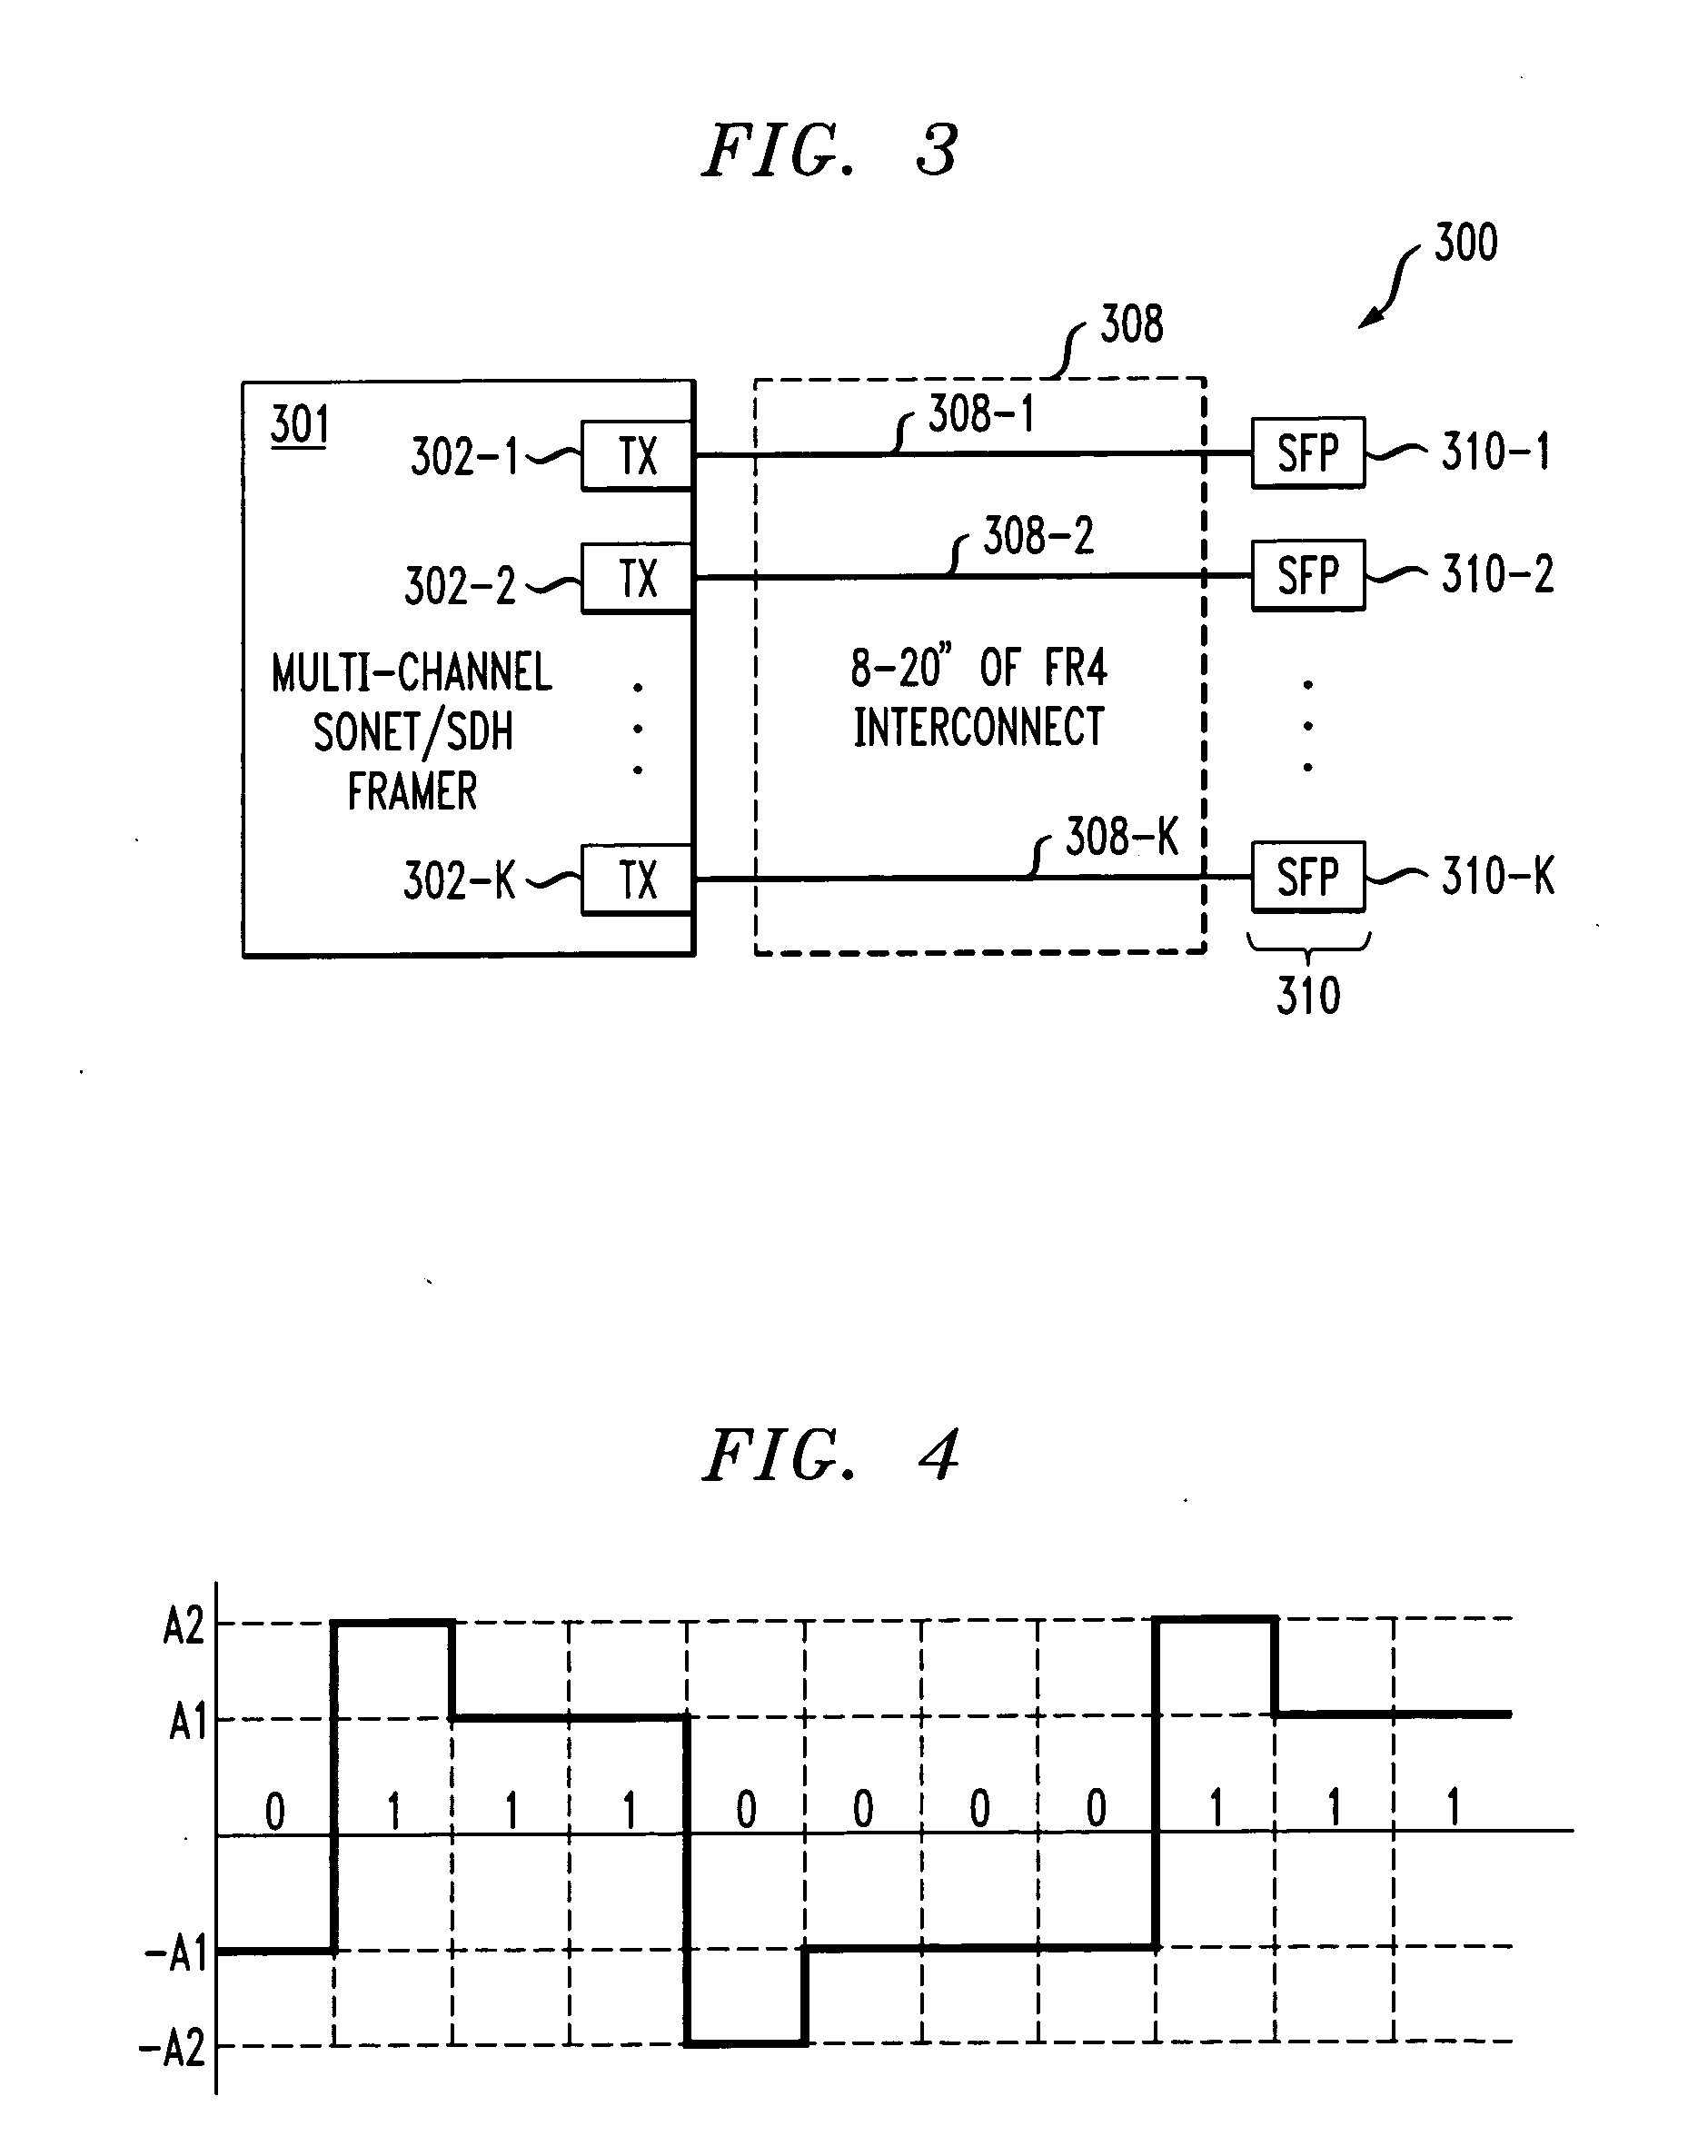 Optical signal jitter reduction via electrical equalization in optical transmission systems